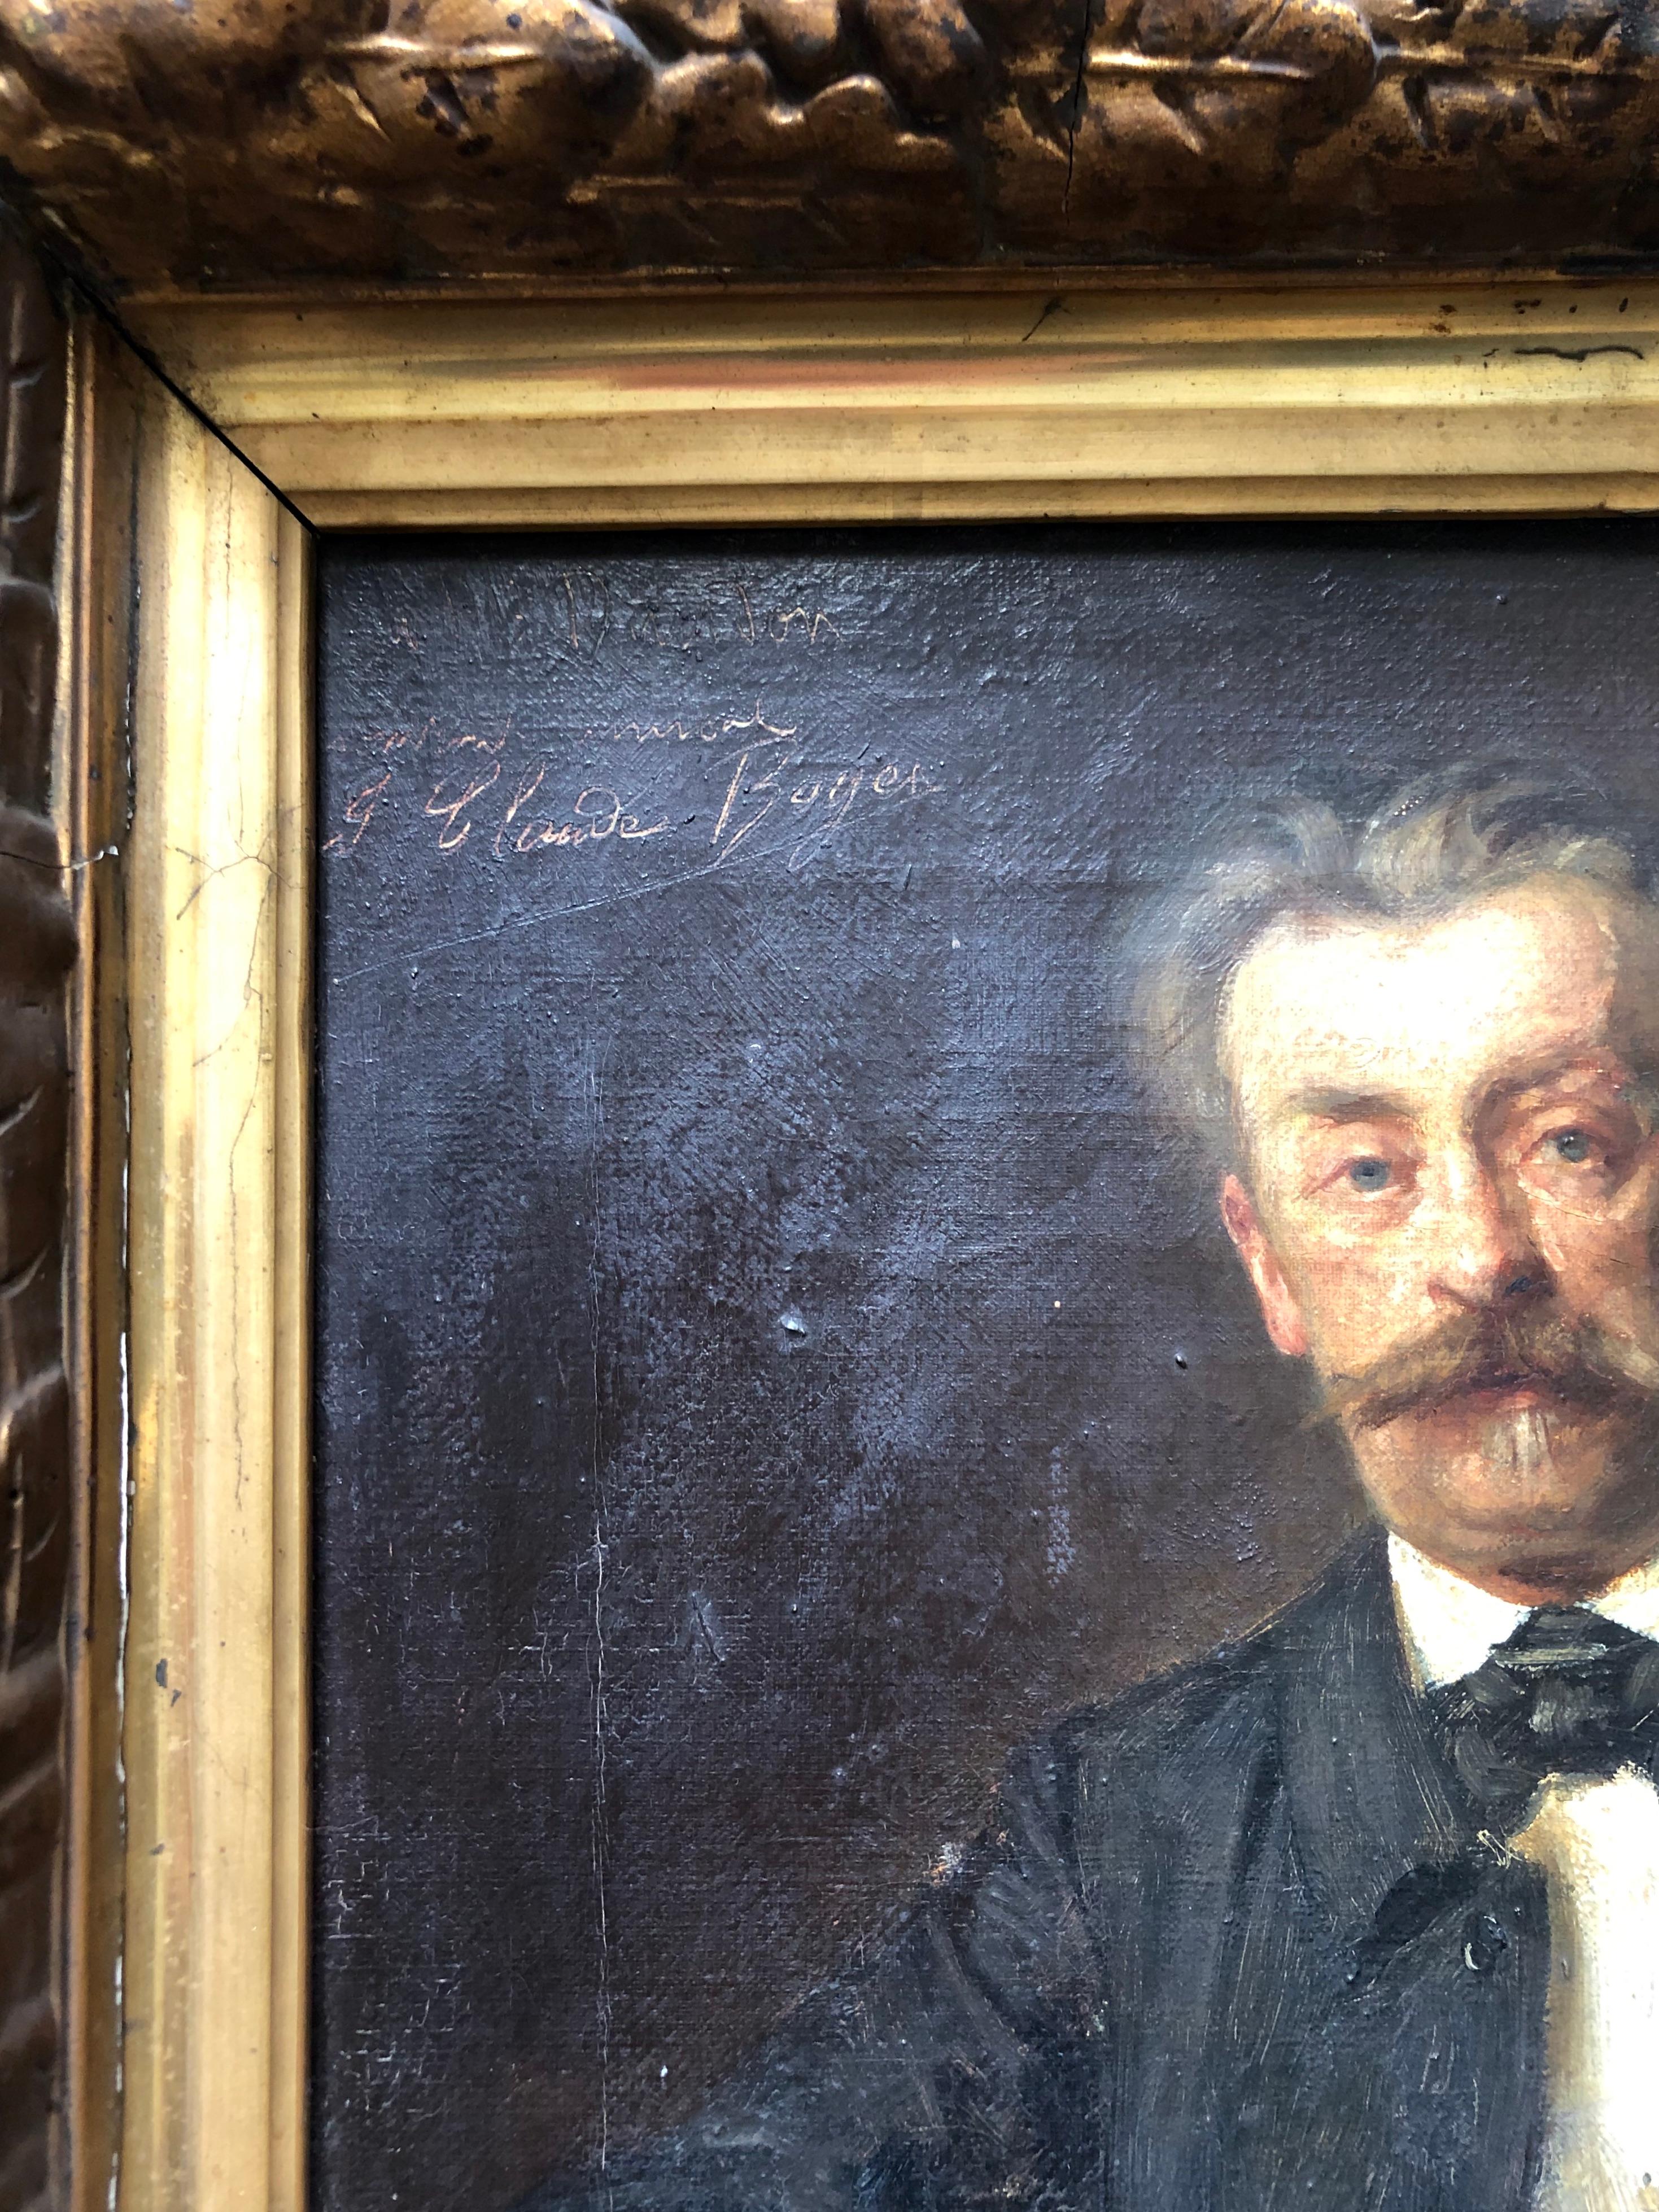 Portrait of a man.
Oil on canvas 19th century.
Signature and annotations to be deciphered at the top left.
Very beautiful period frame.
Very light scratches on the canvas.
Small gaps in stucco on the frame.
Chassis: 35 x 29 cm
Frame: 60 x 53 cm